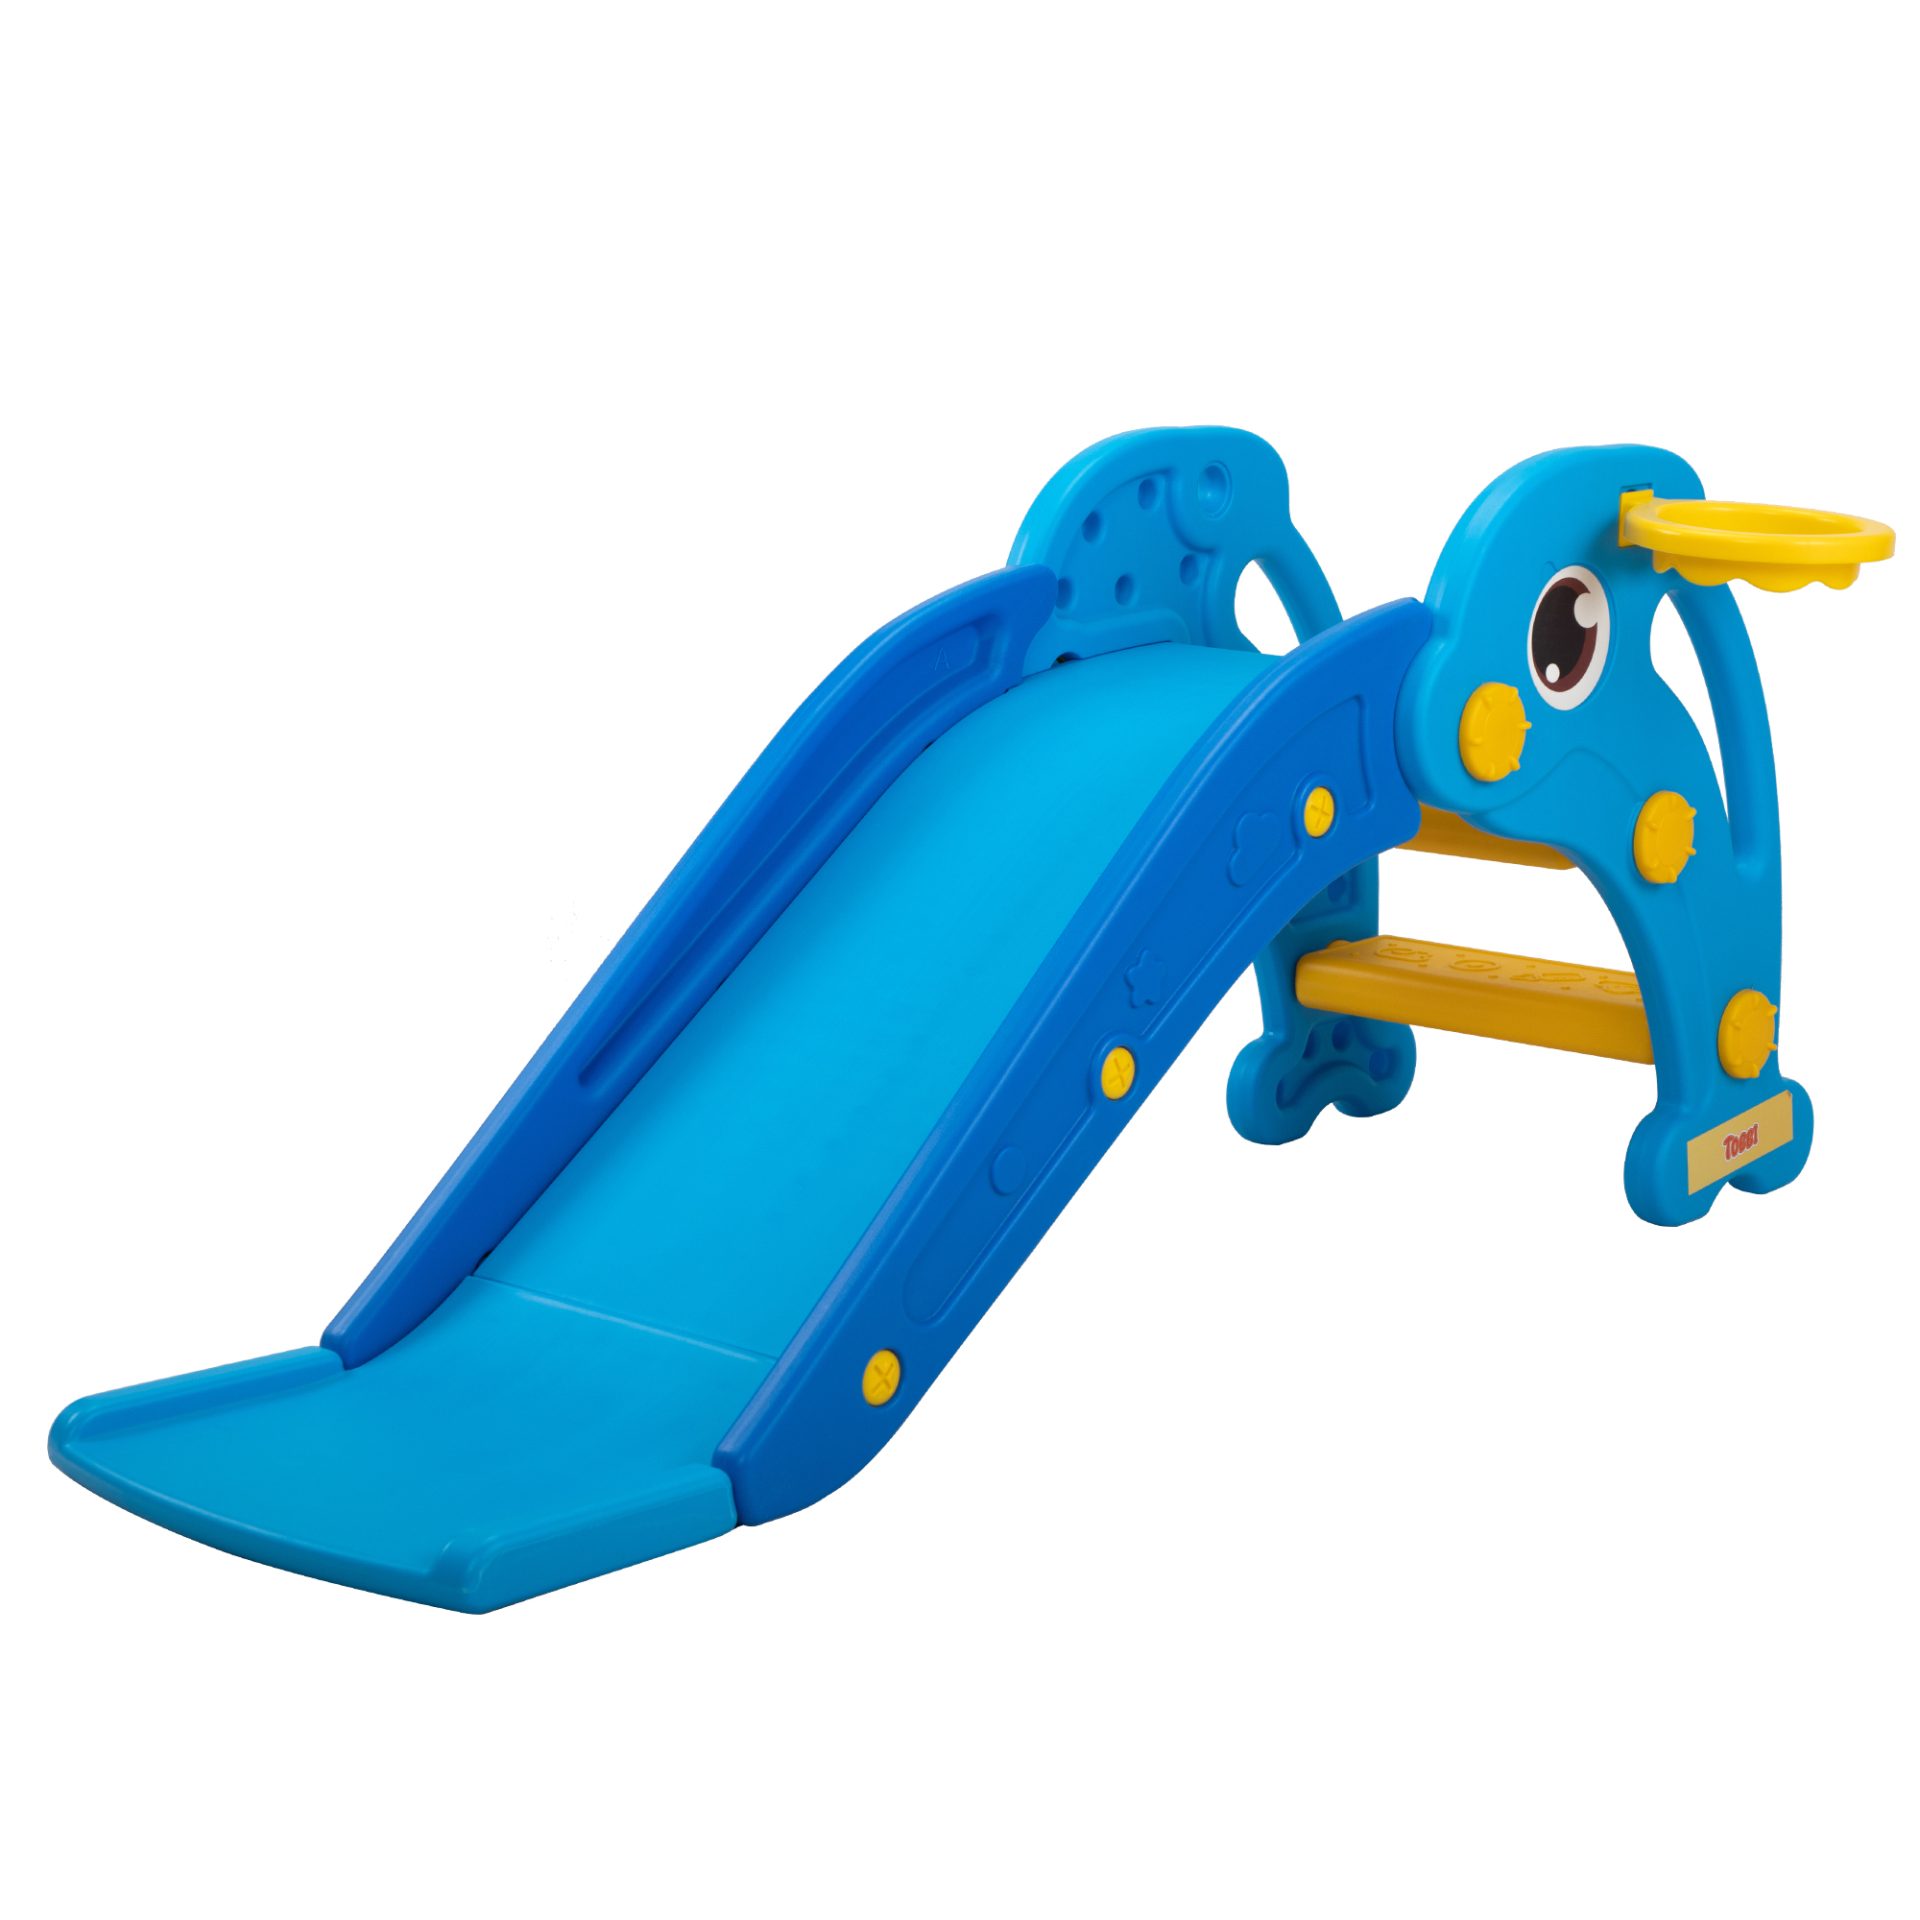 Nyeekoy 3 In 1 Toddler Slide, Kid’s Climbing Sliding Fun Toy w/ Basketball Hoop and Ball, Indoor and Outdoor, Sky Blue TH17Y08404